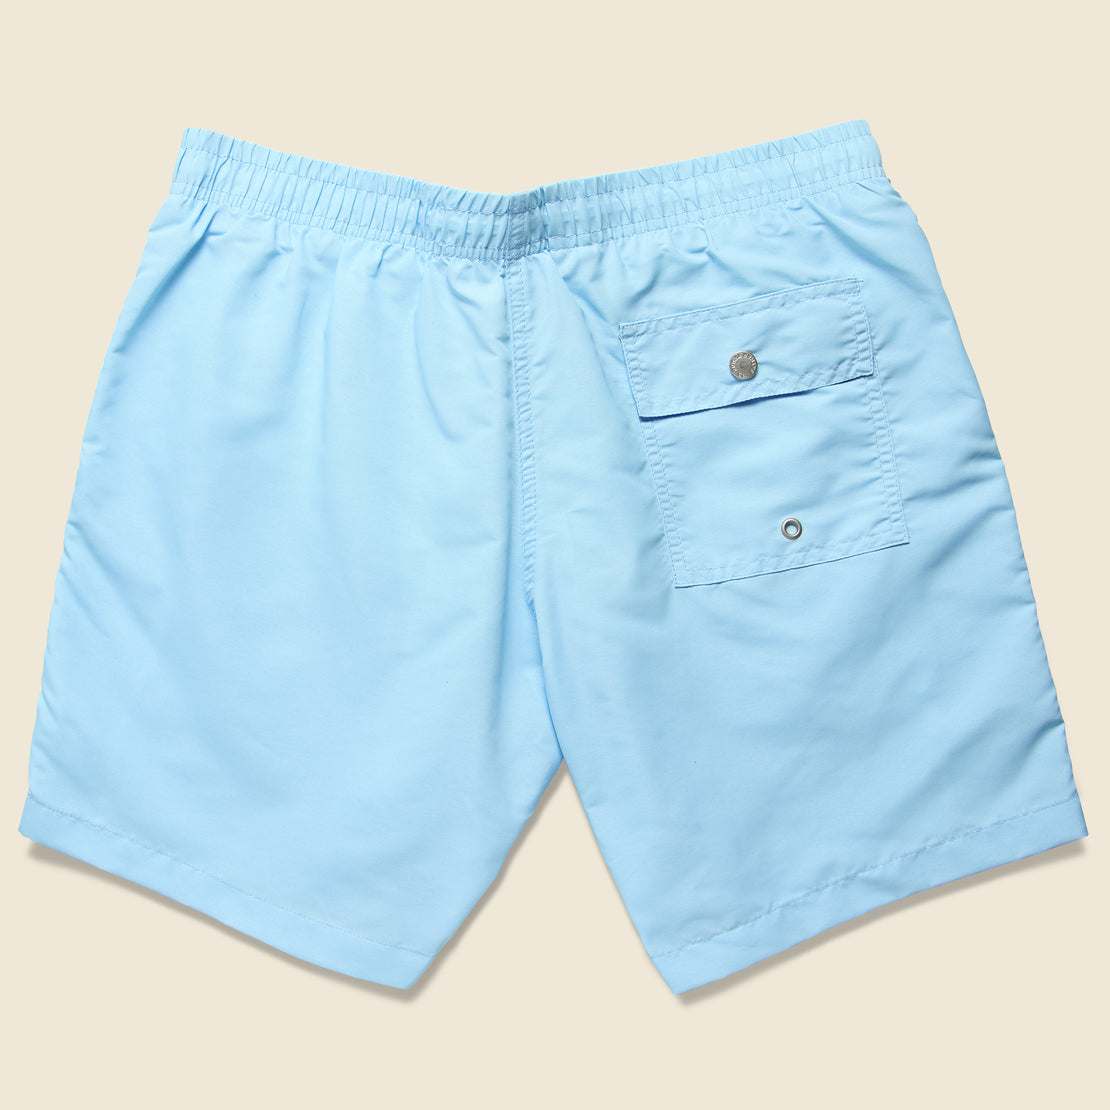 Solid Swim Trunk - Baby Blue - Bather - STAG Provisions - Shorts - Swim